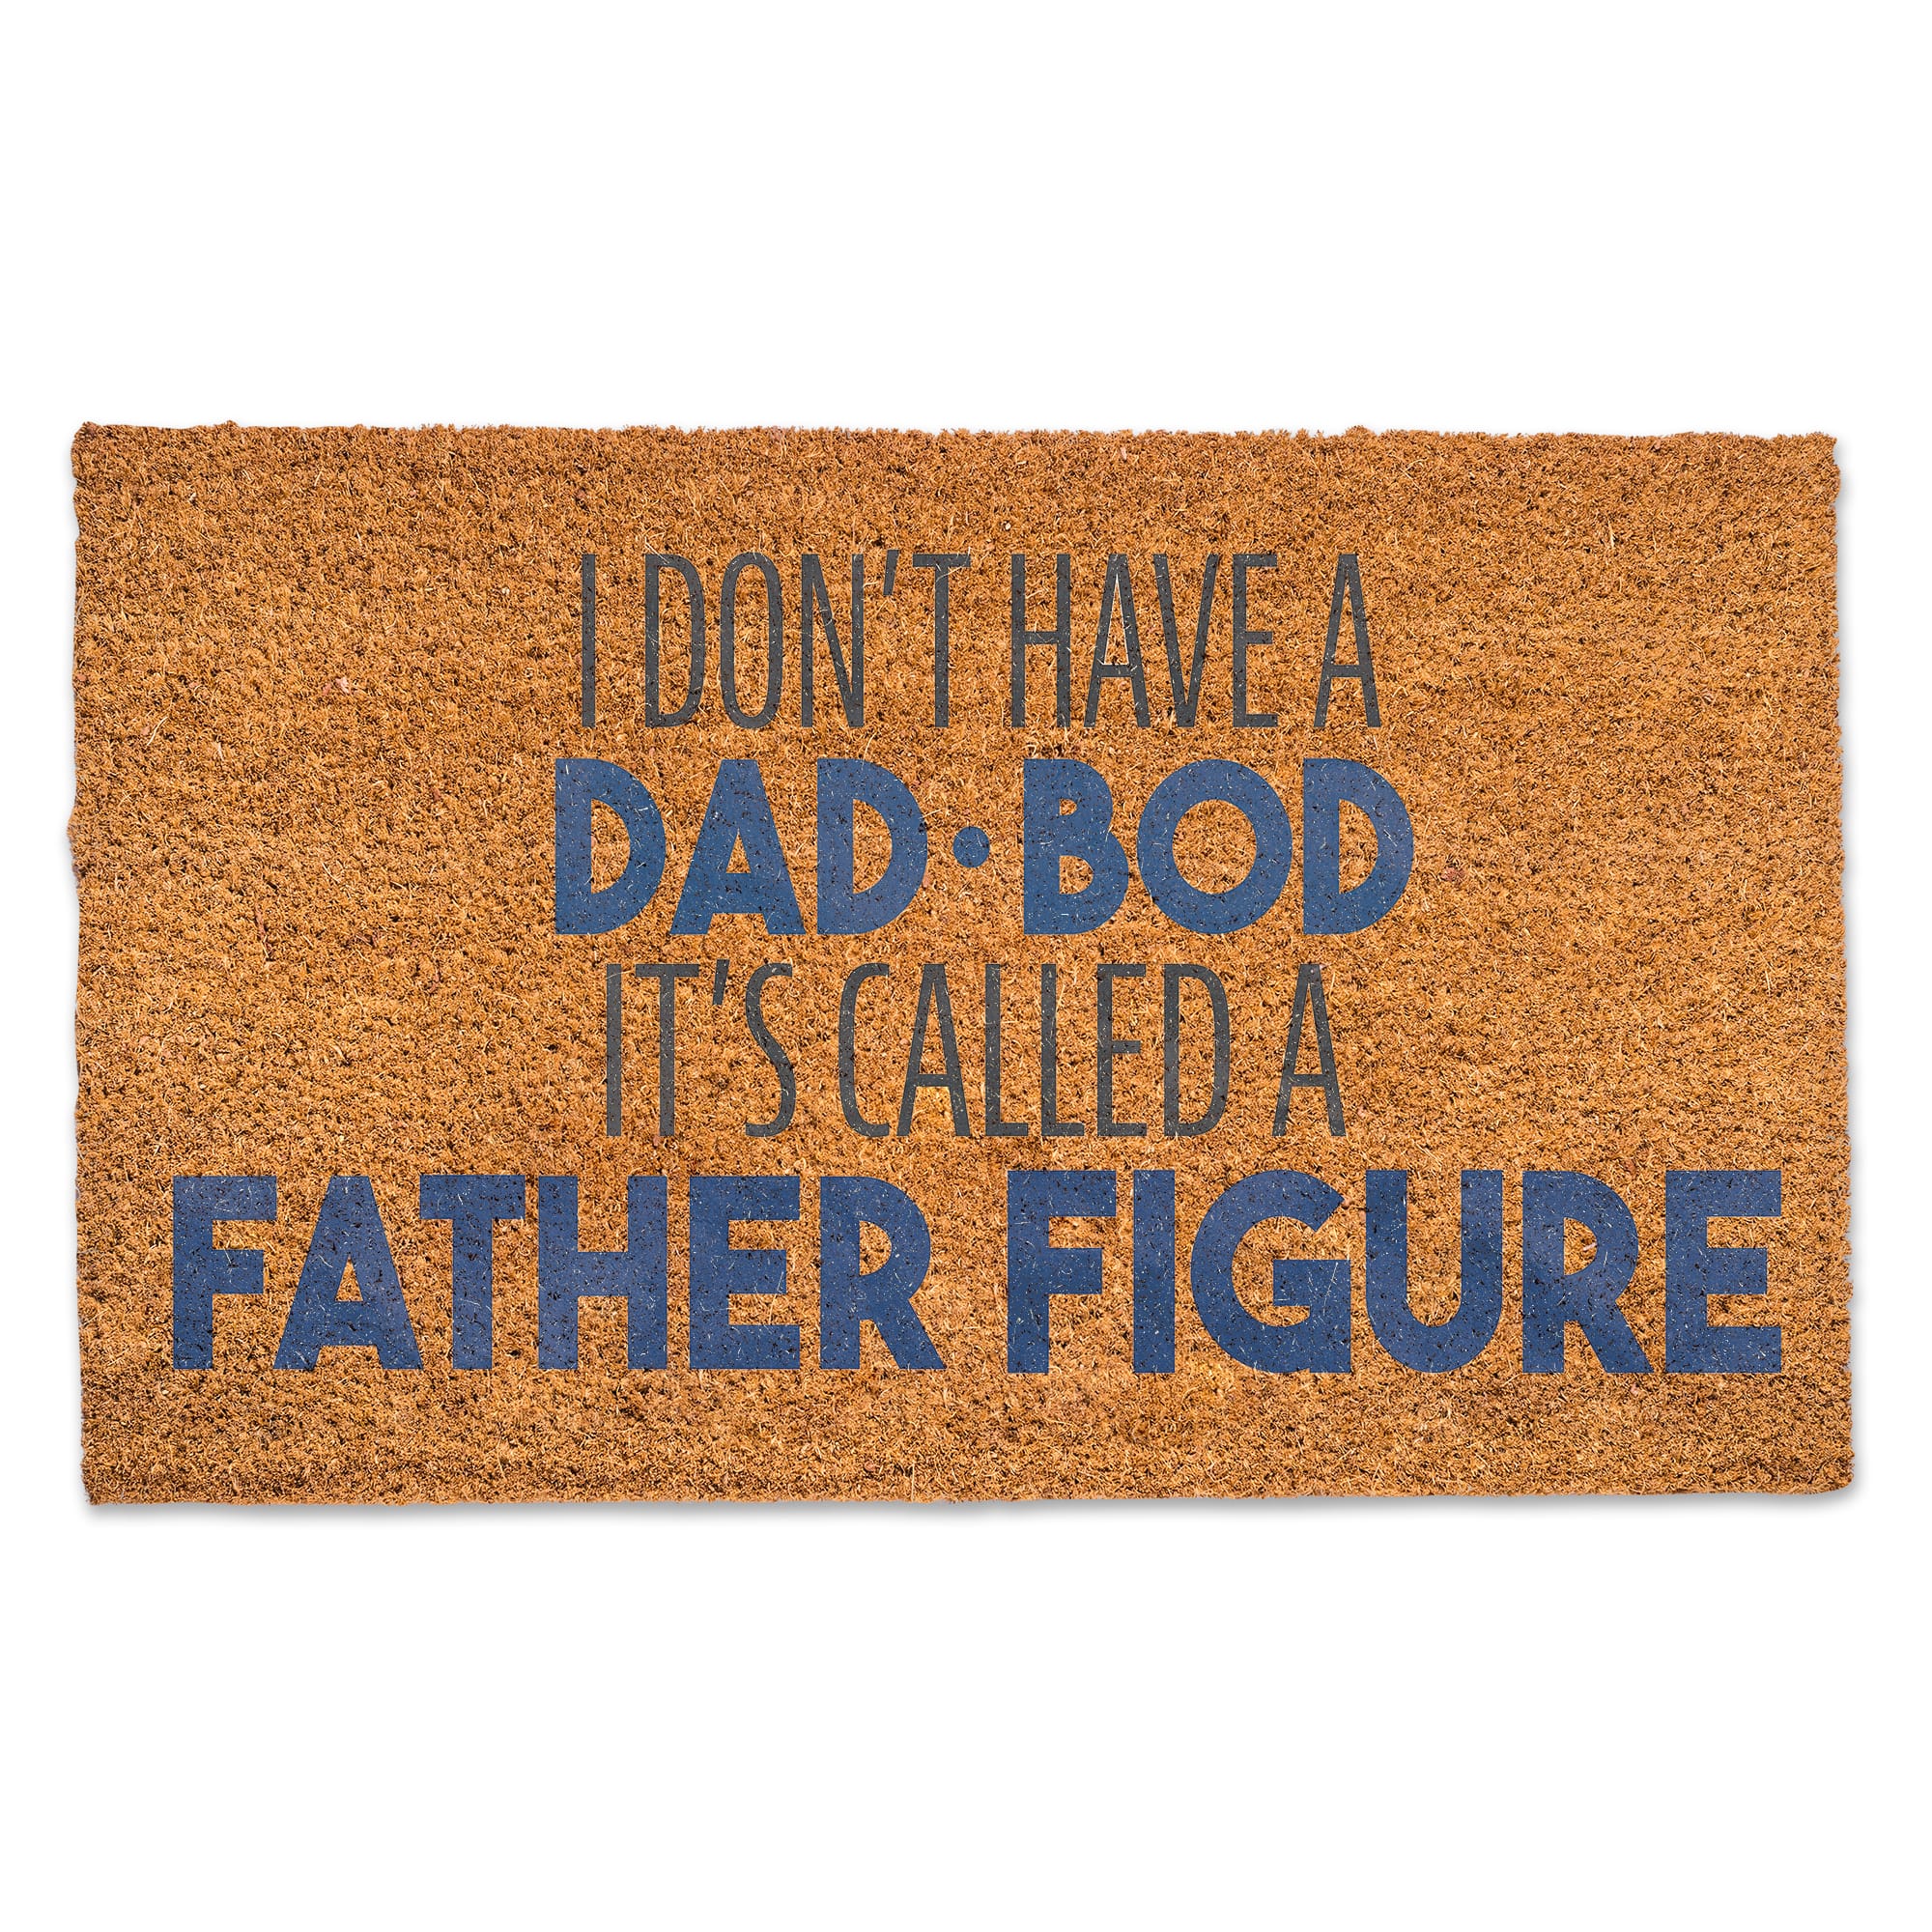 Not a Dad Bod a Father Figure Doormat